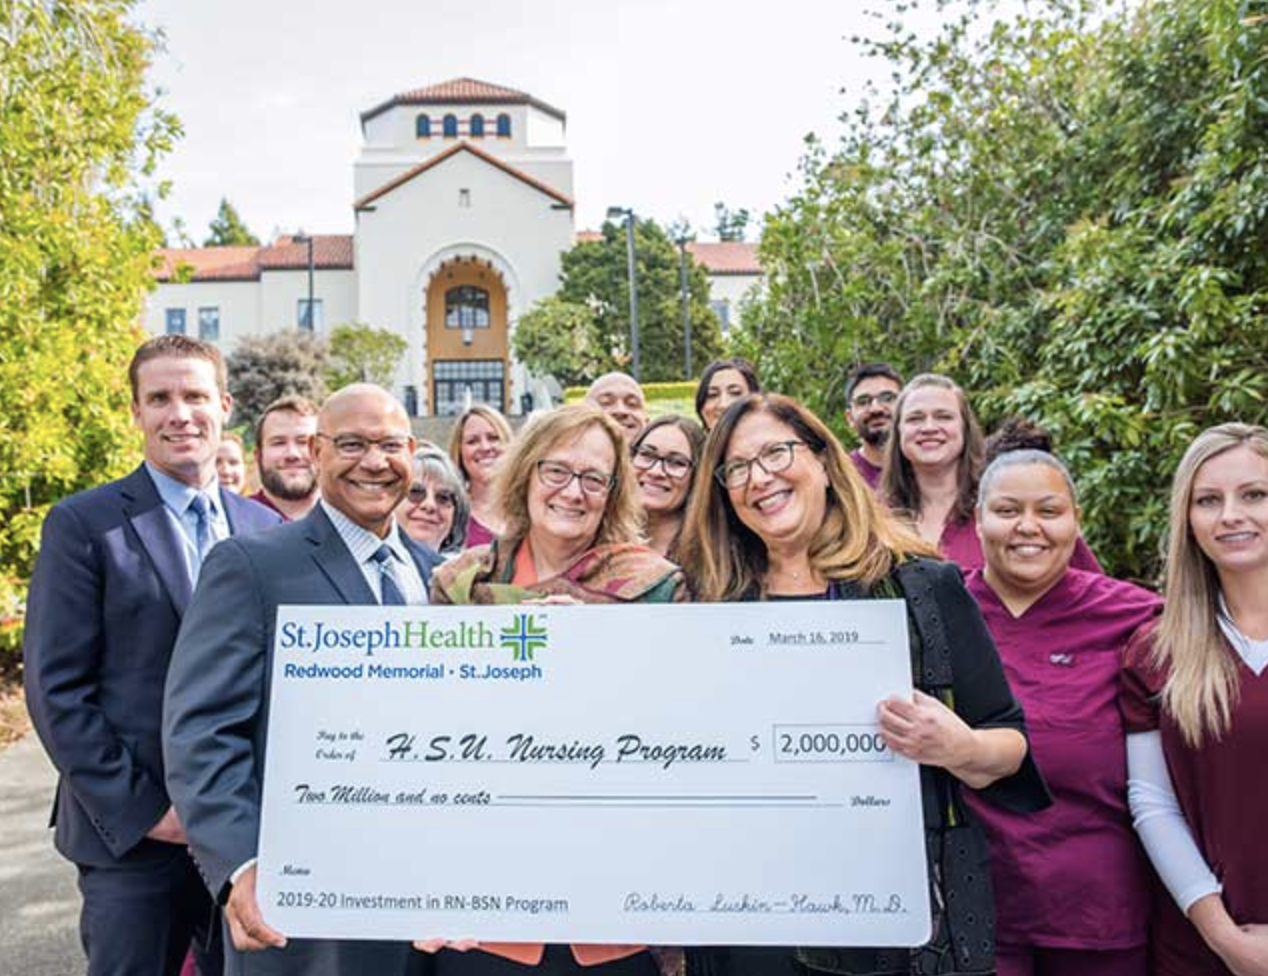 Standing with nursing students are (from left to right) State Senator Mike McGuire; College of the Redwoods President Keith Flamer; Humboldt State University President Lisa Rossbacher; and Roberta Luskin-Hawk, M.D., St. Joseph Health, Humboldt County.